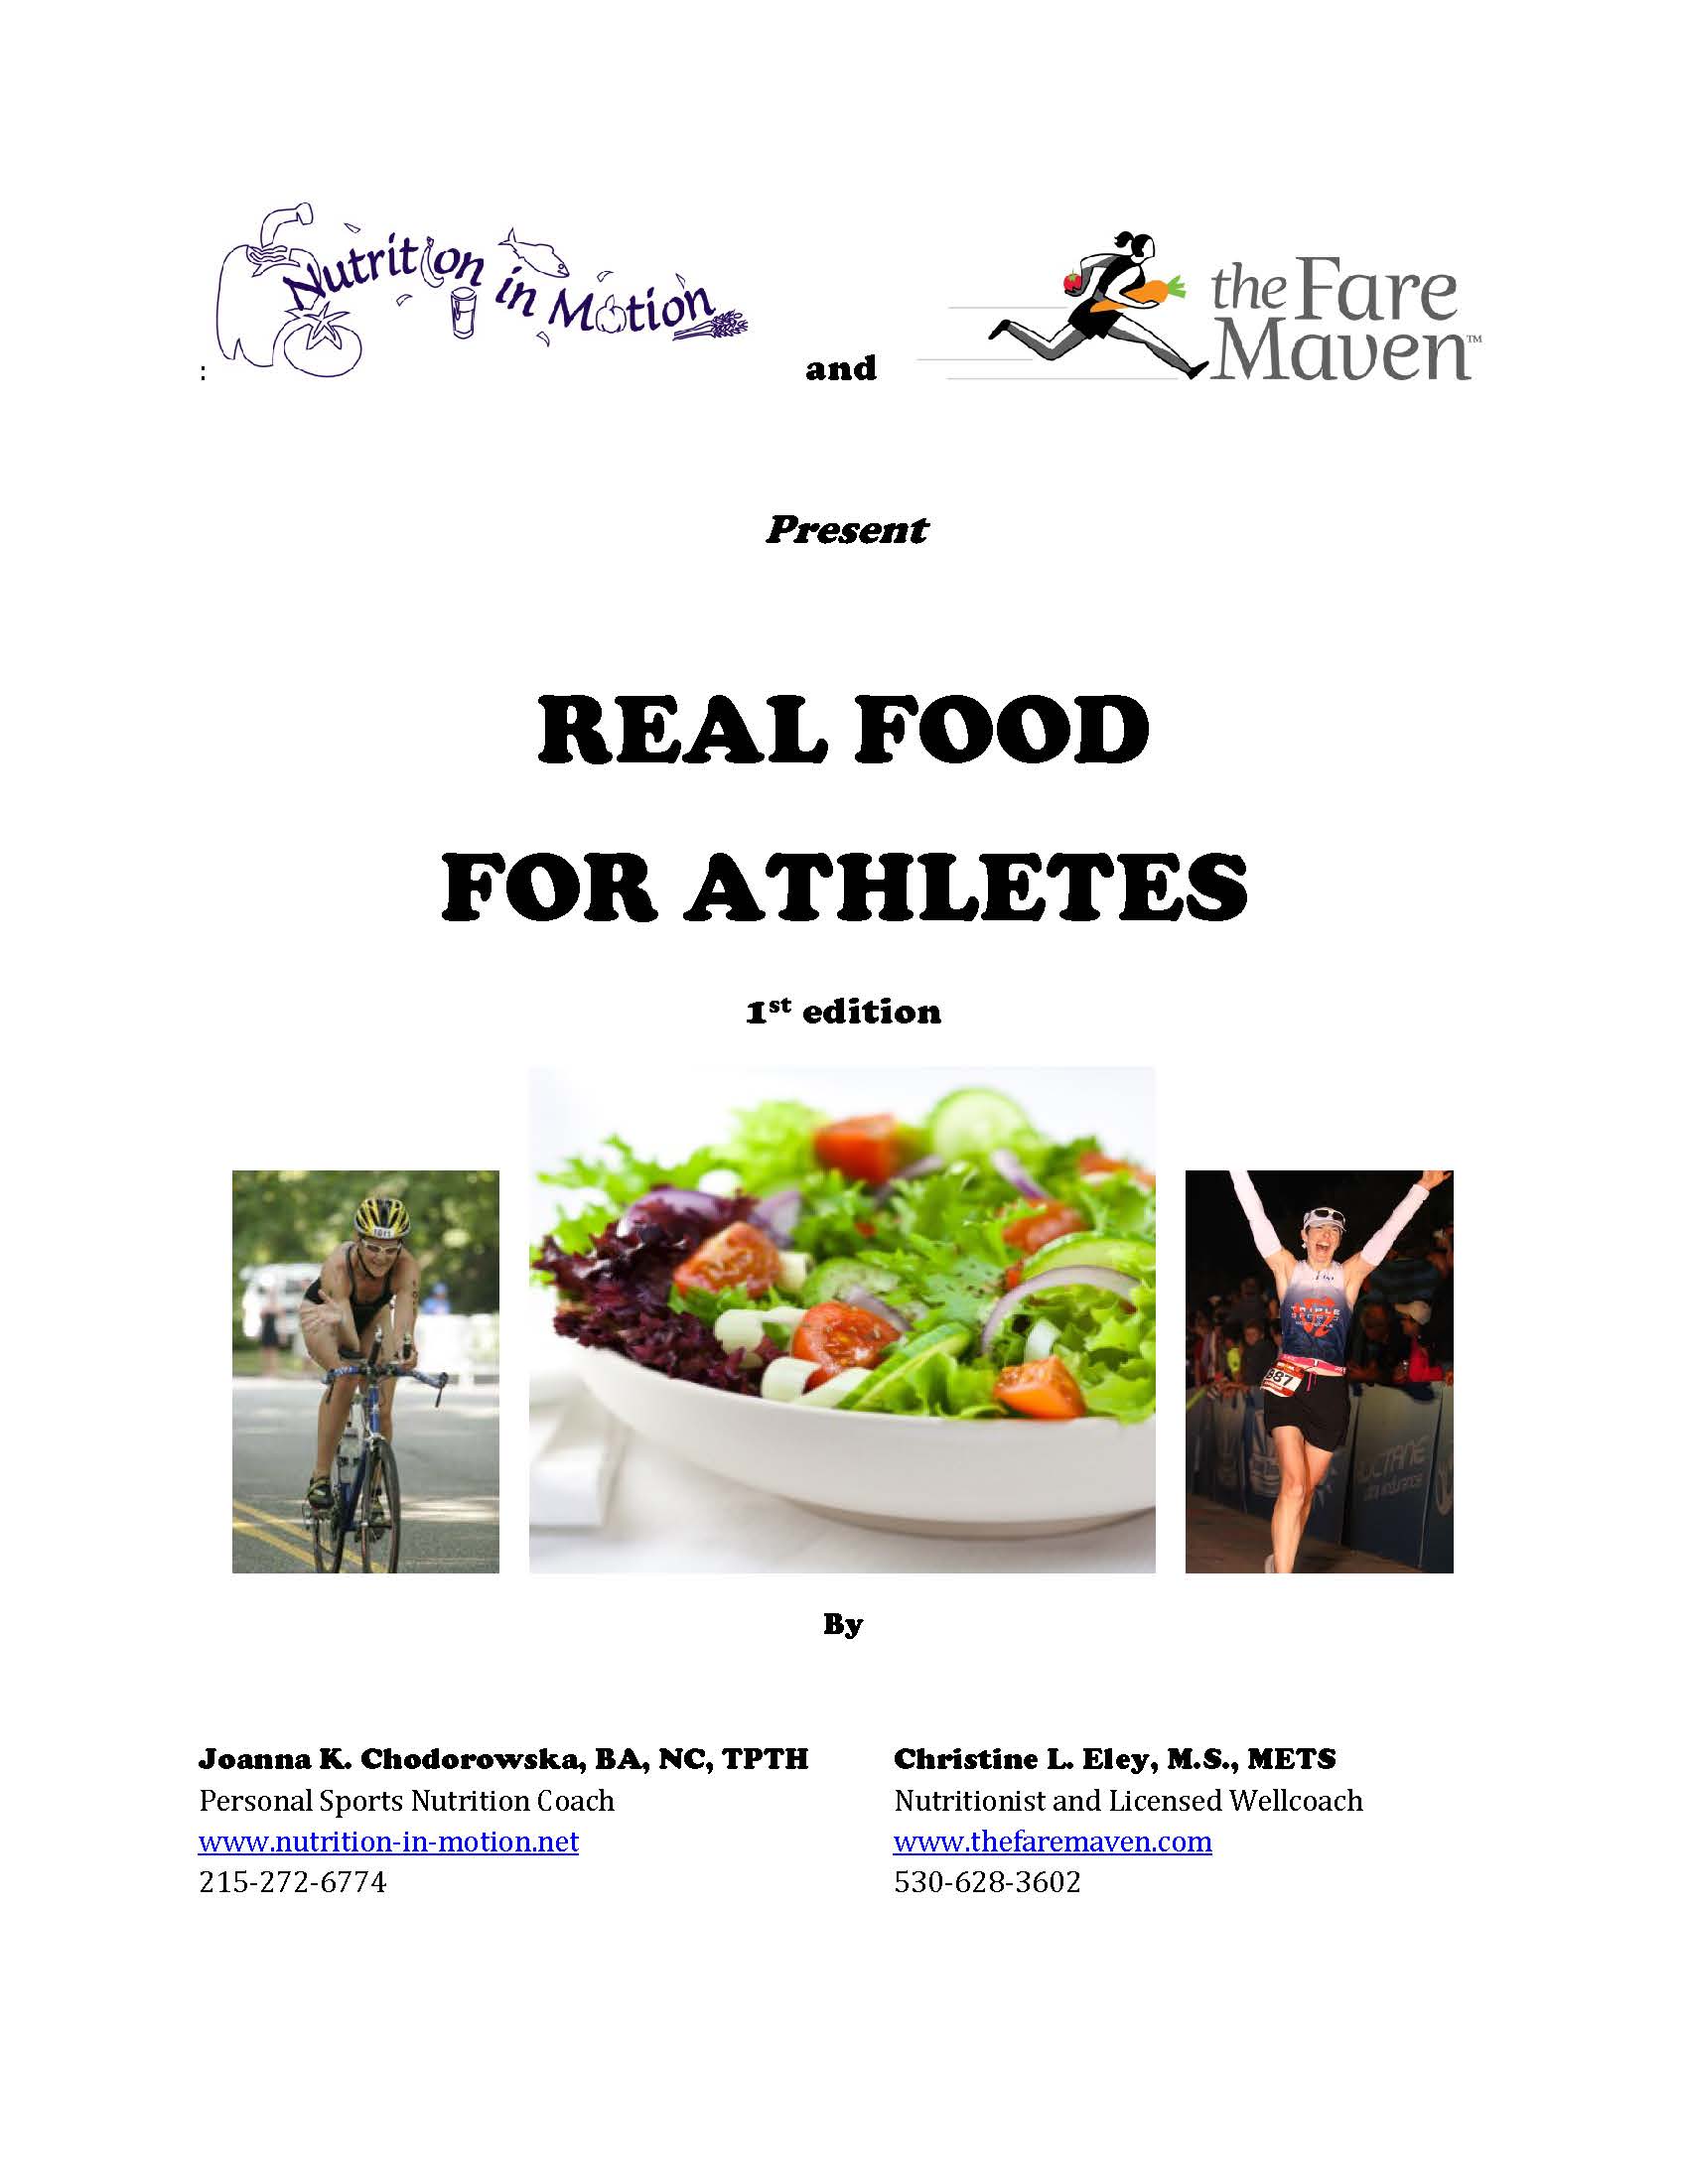 Real Food For Athletes book is here!